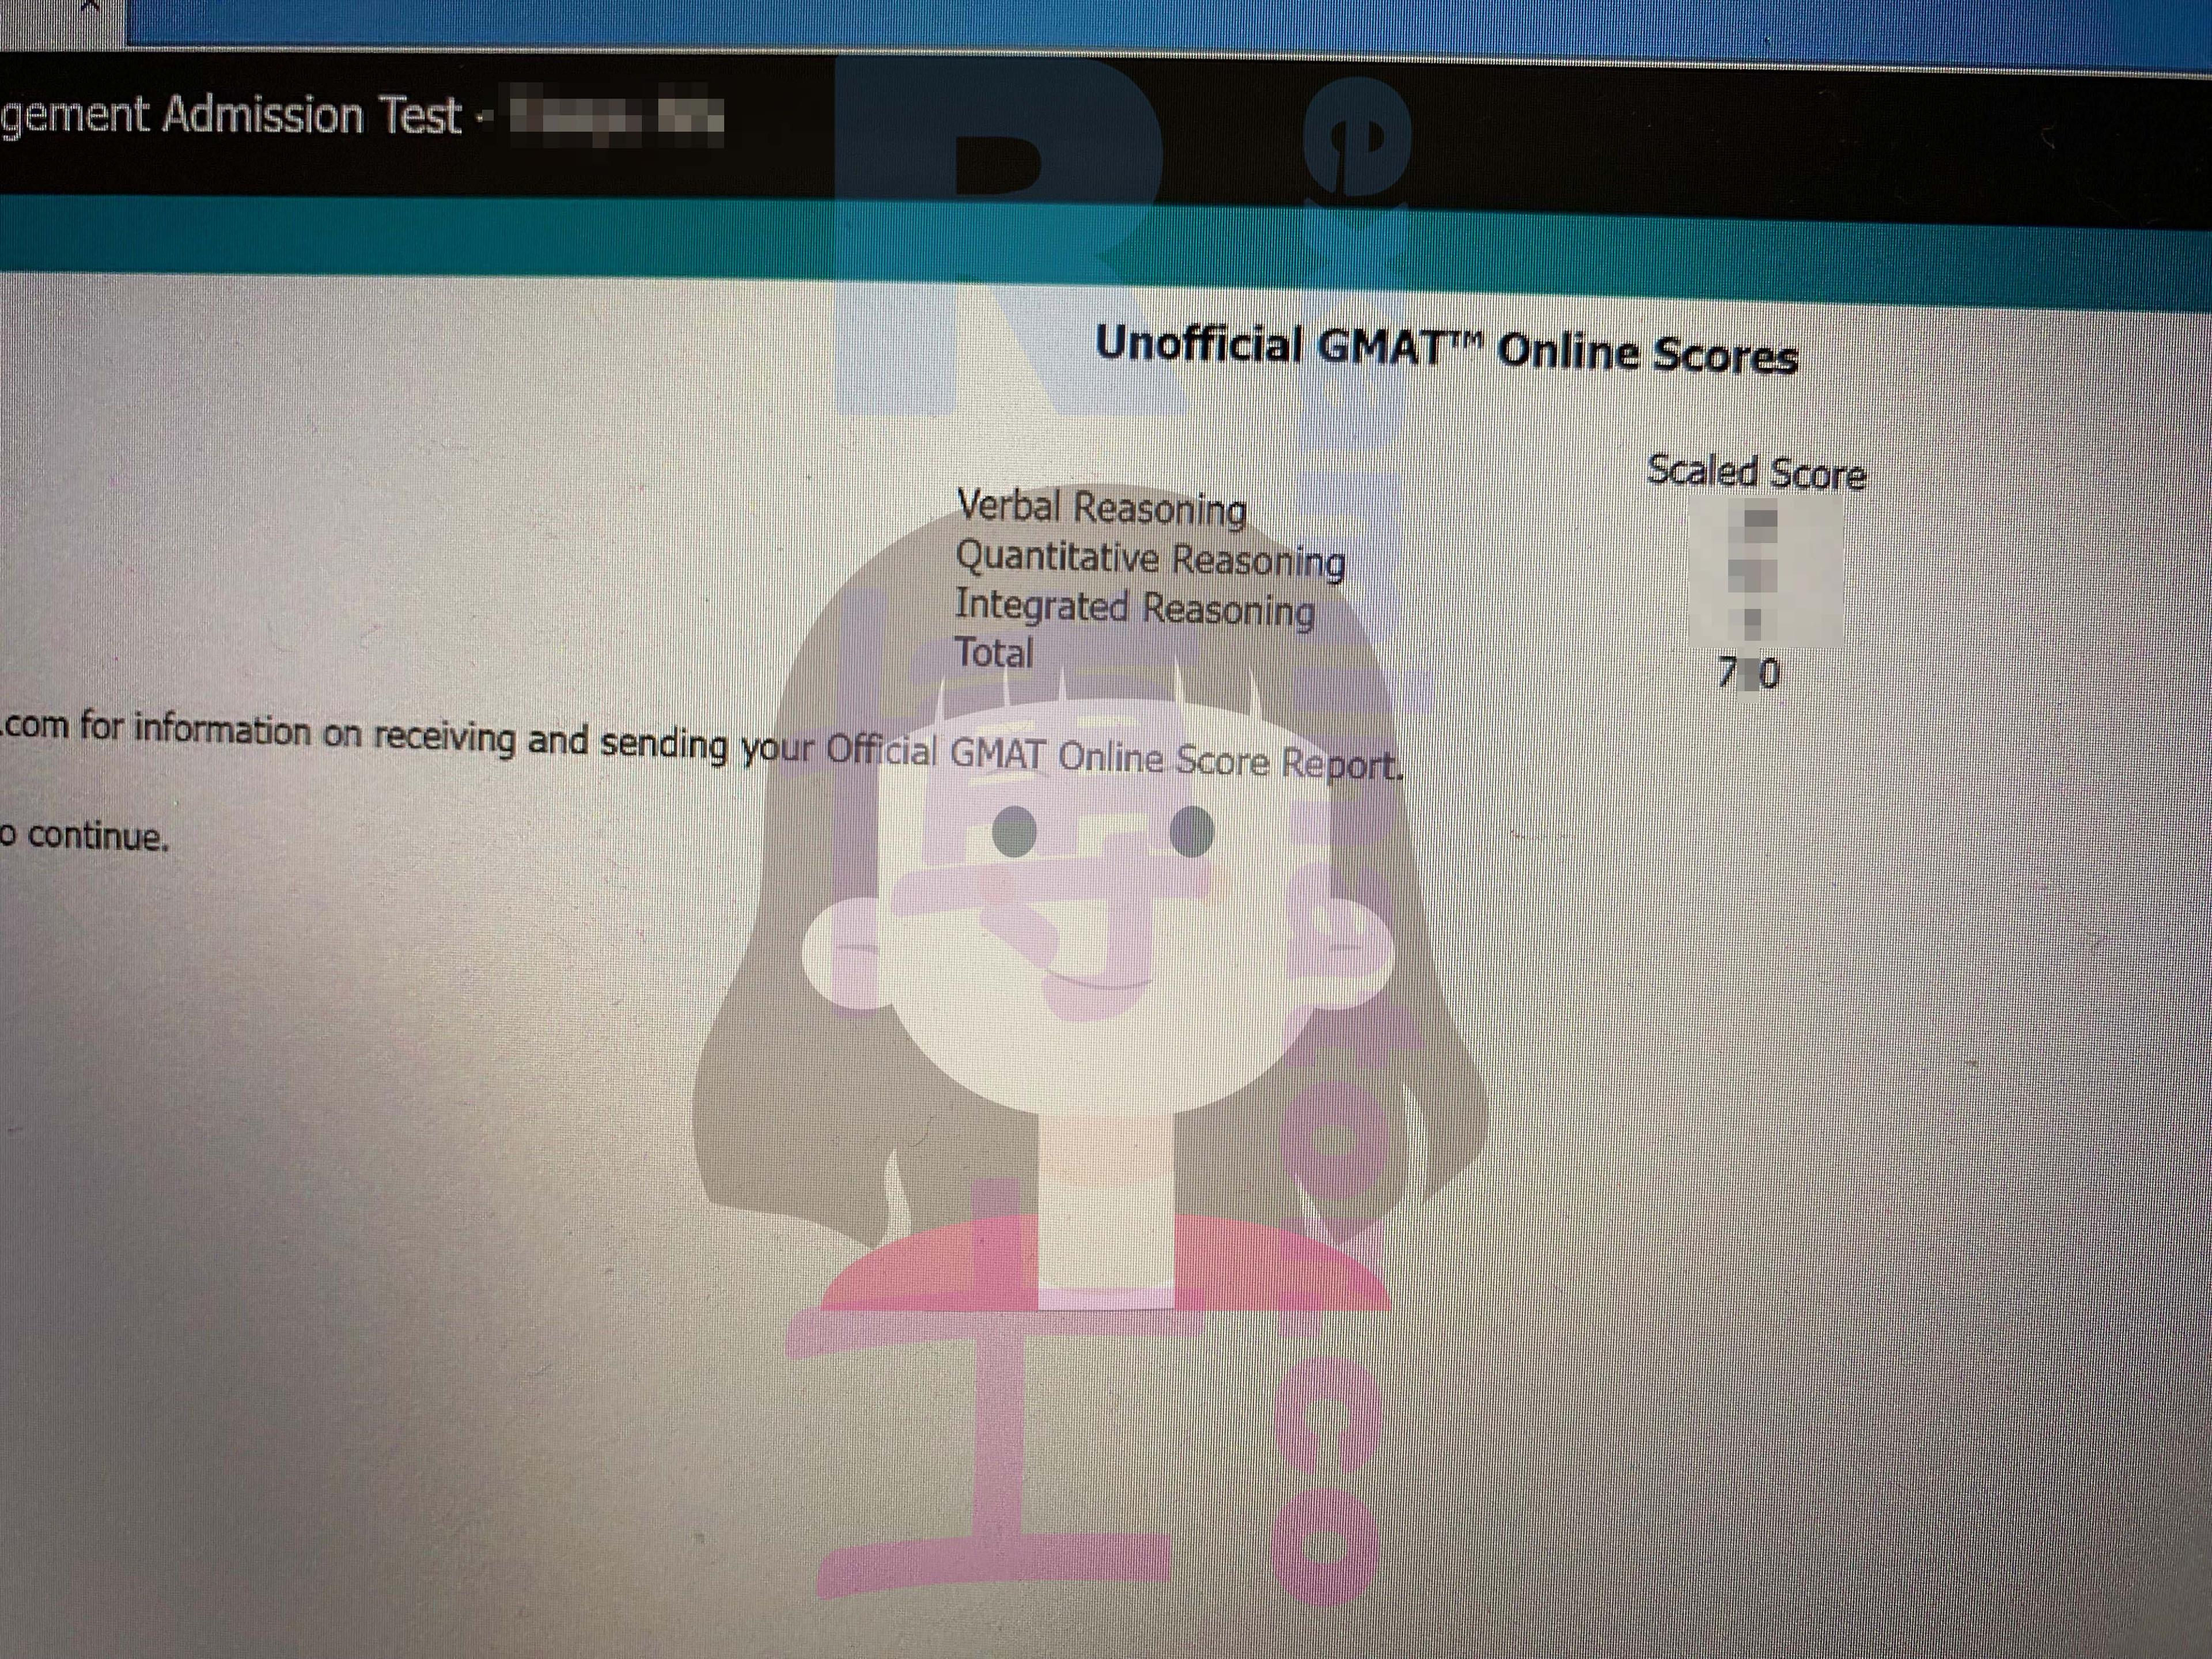 score image for GMAT Cheating success story #520